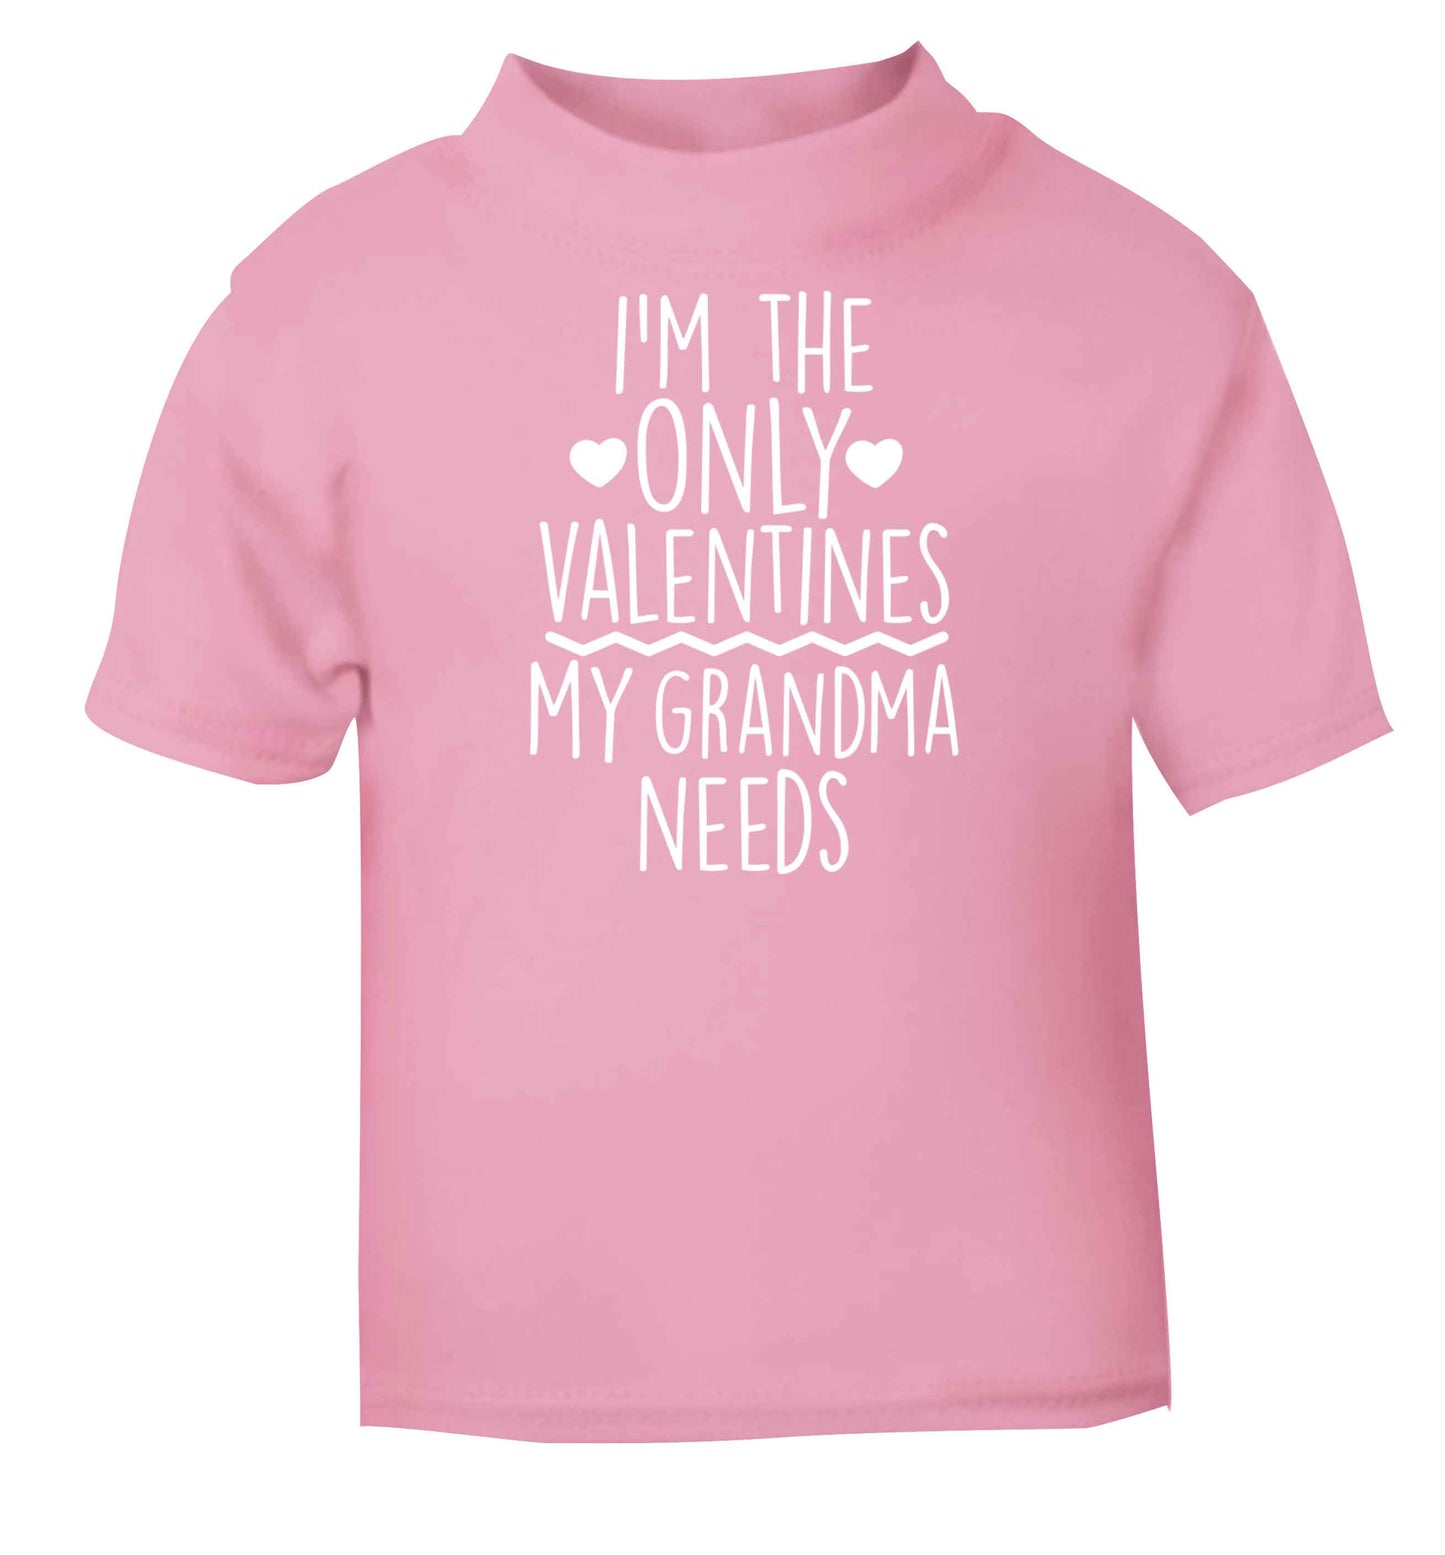 I'm the only valentines my grandma needs light pink baby toddler Tshirt 2 Years